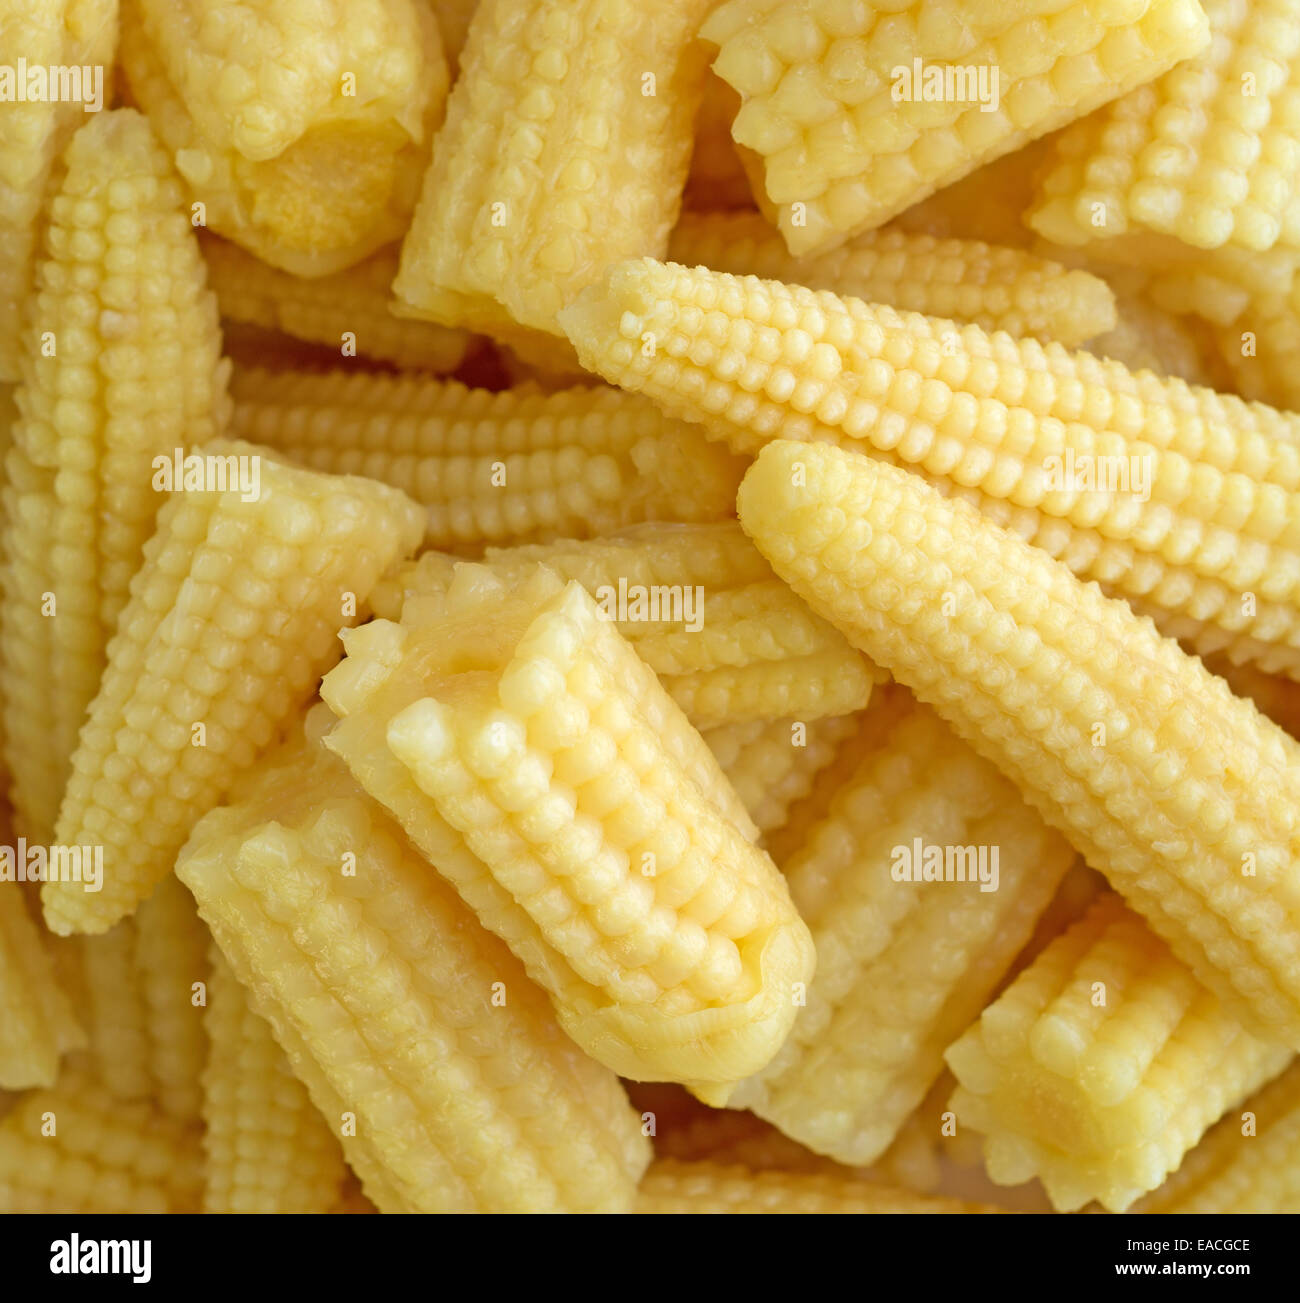 A very close view of small baby corn nuggets. Stock Photo